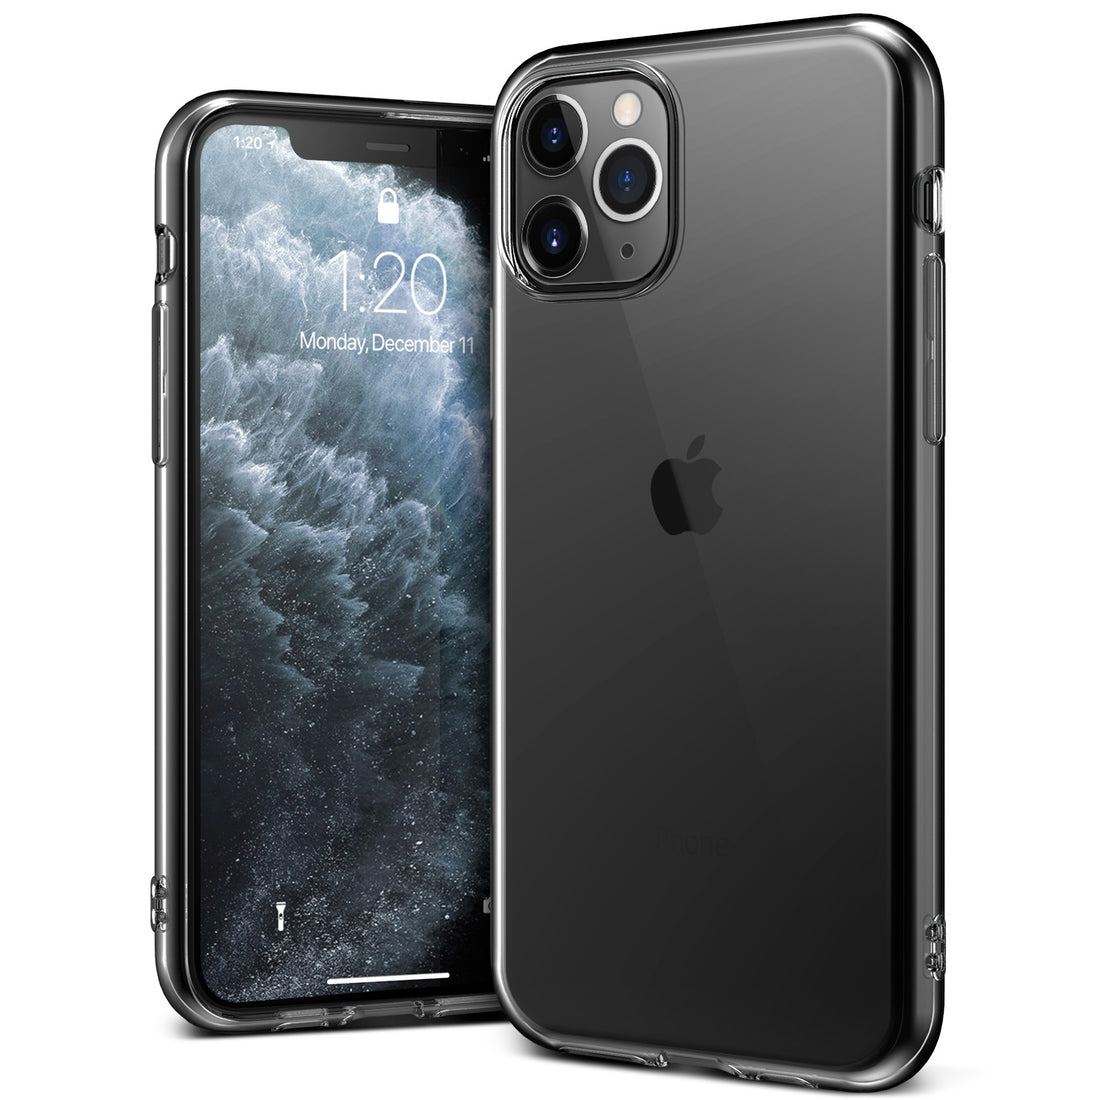 iPhone 11 Pro Case Damda Crystal Fit Anti-yellowing everlasting clear back  adds sleek and minimalist design.